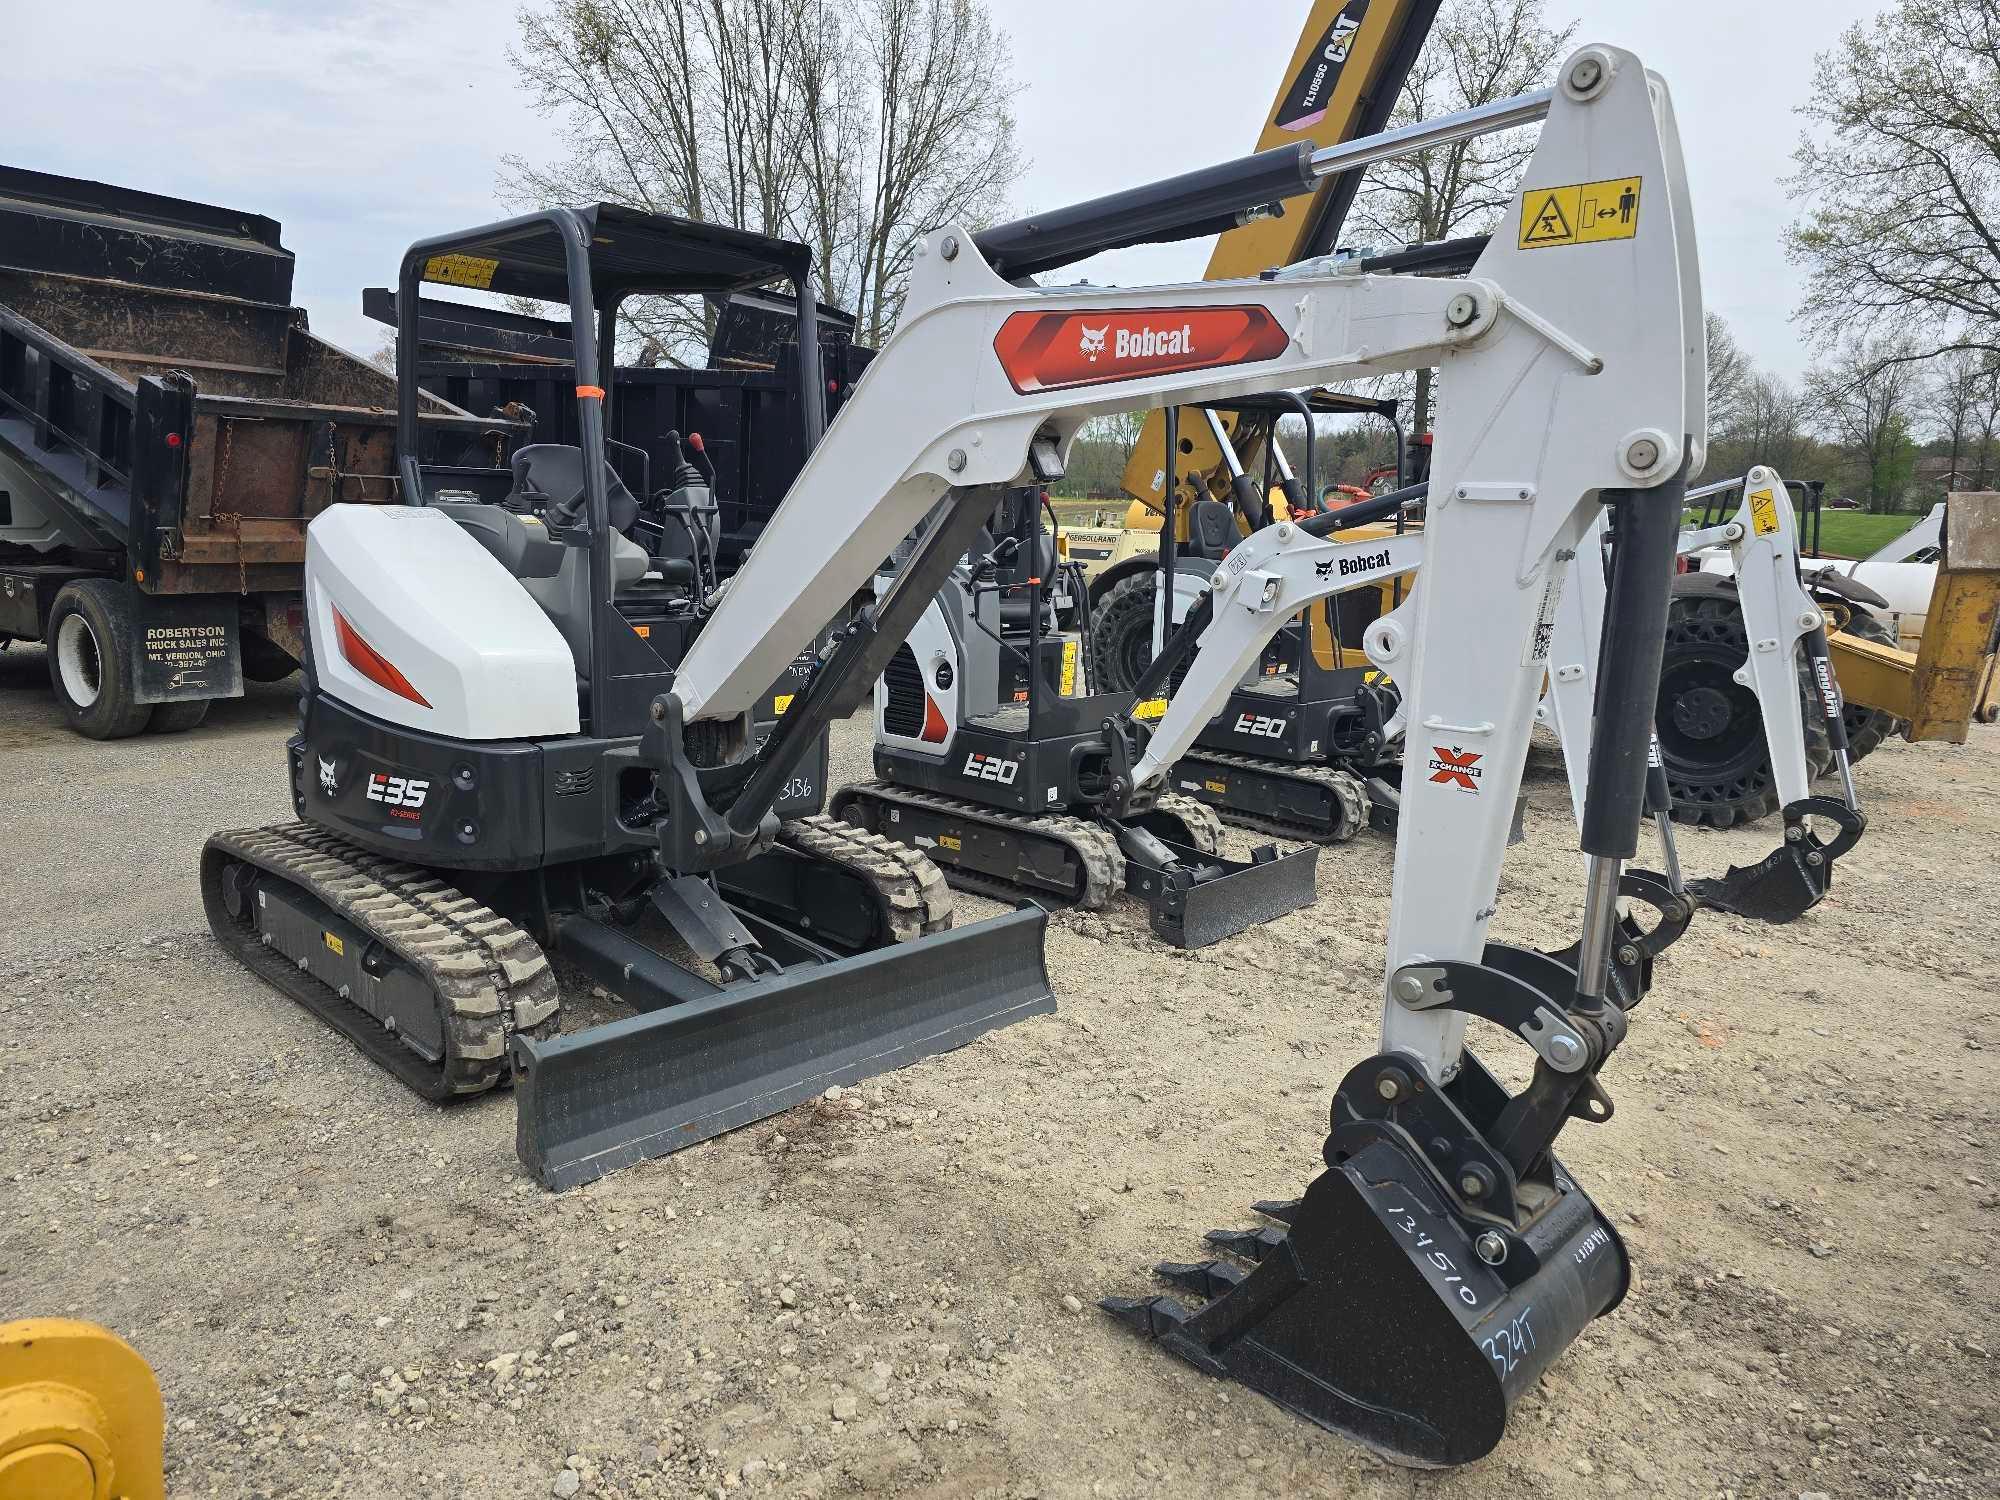 2023 BOBCAT E35 HYDRAULIC EXCAVATOR SN-914493 powered by diesel engine, equipped with OROPS, front